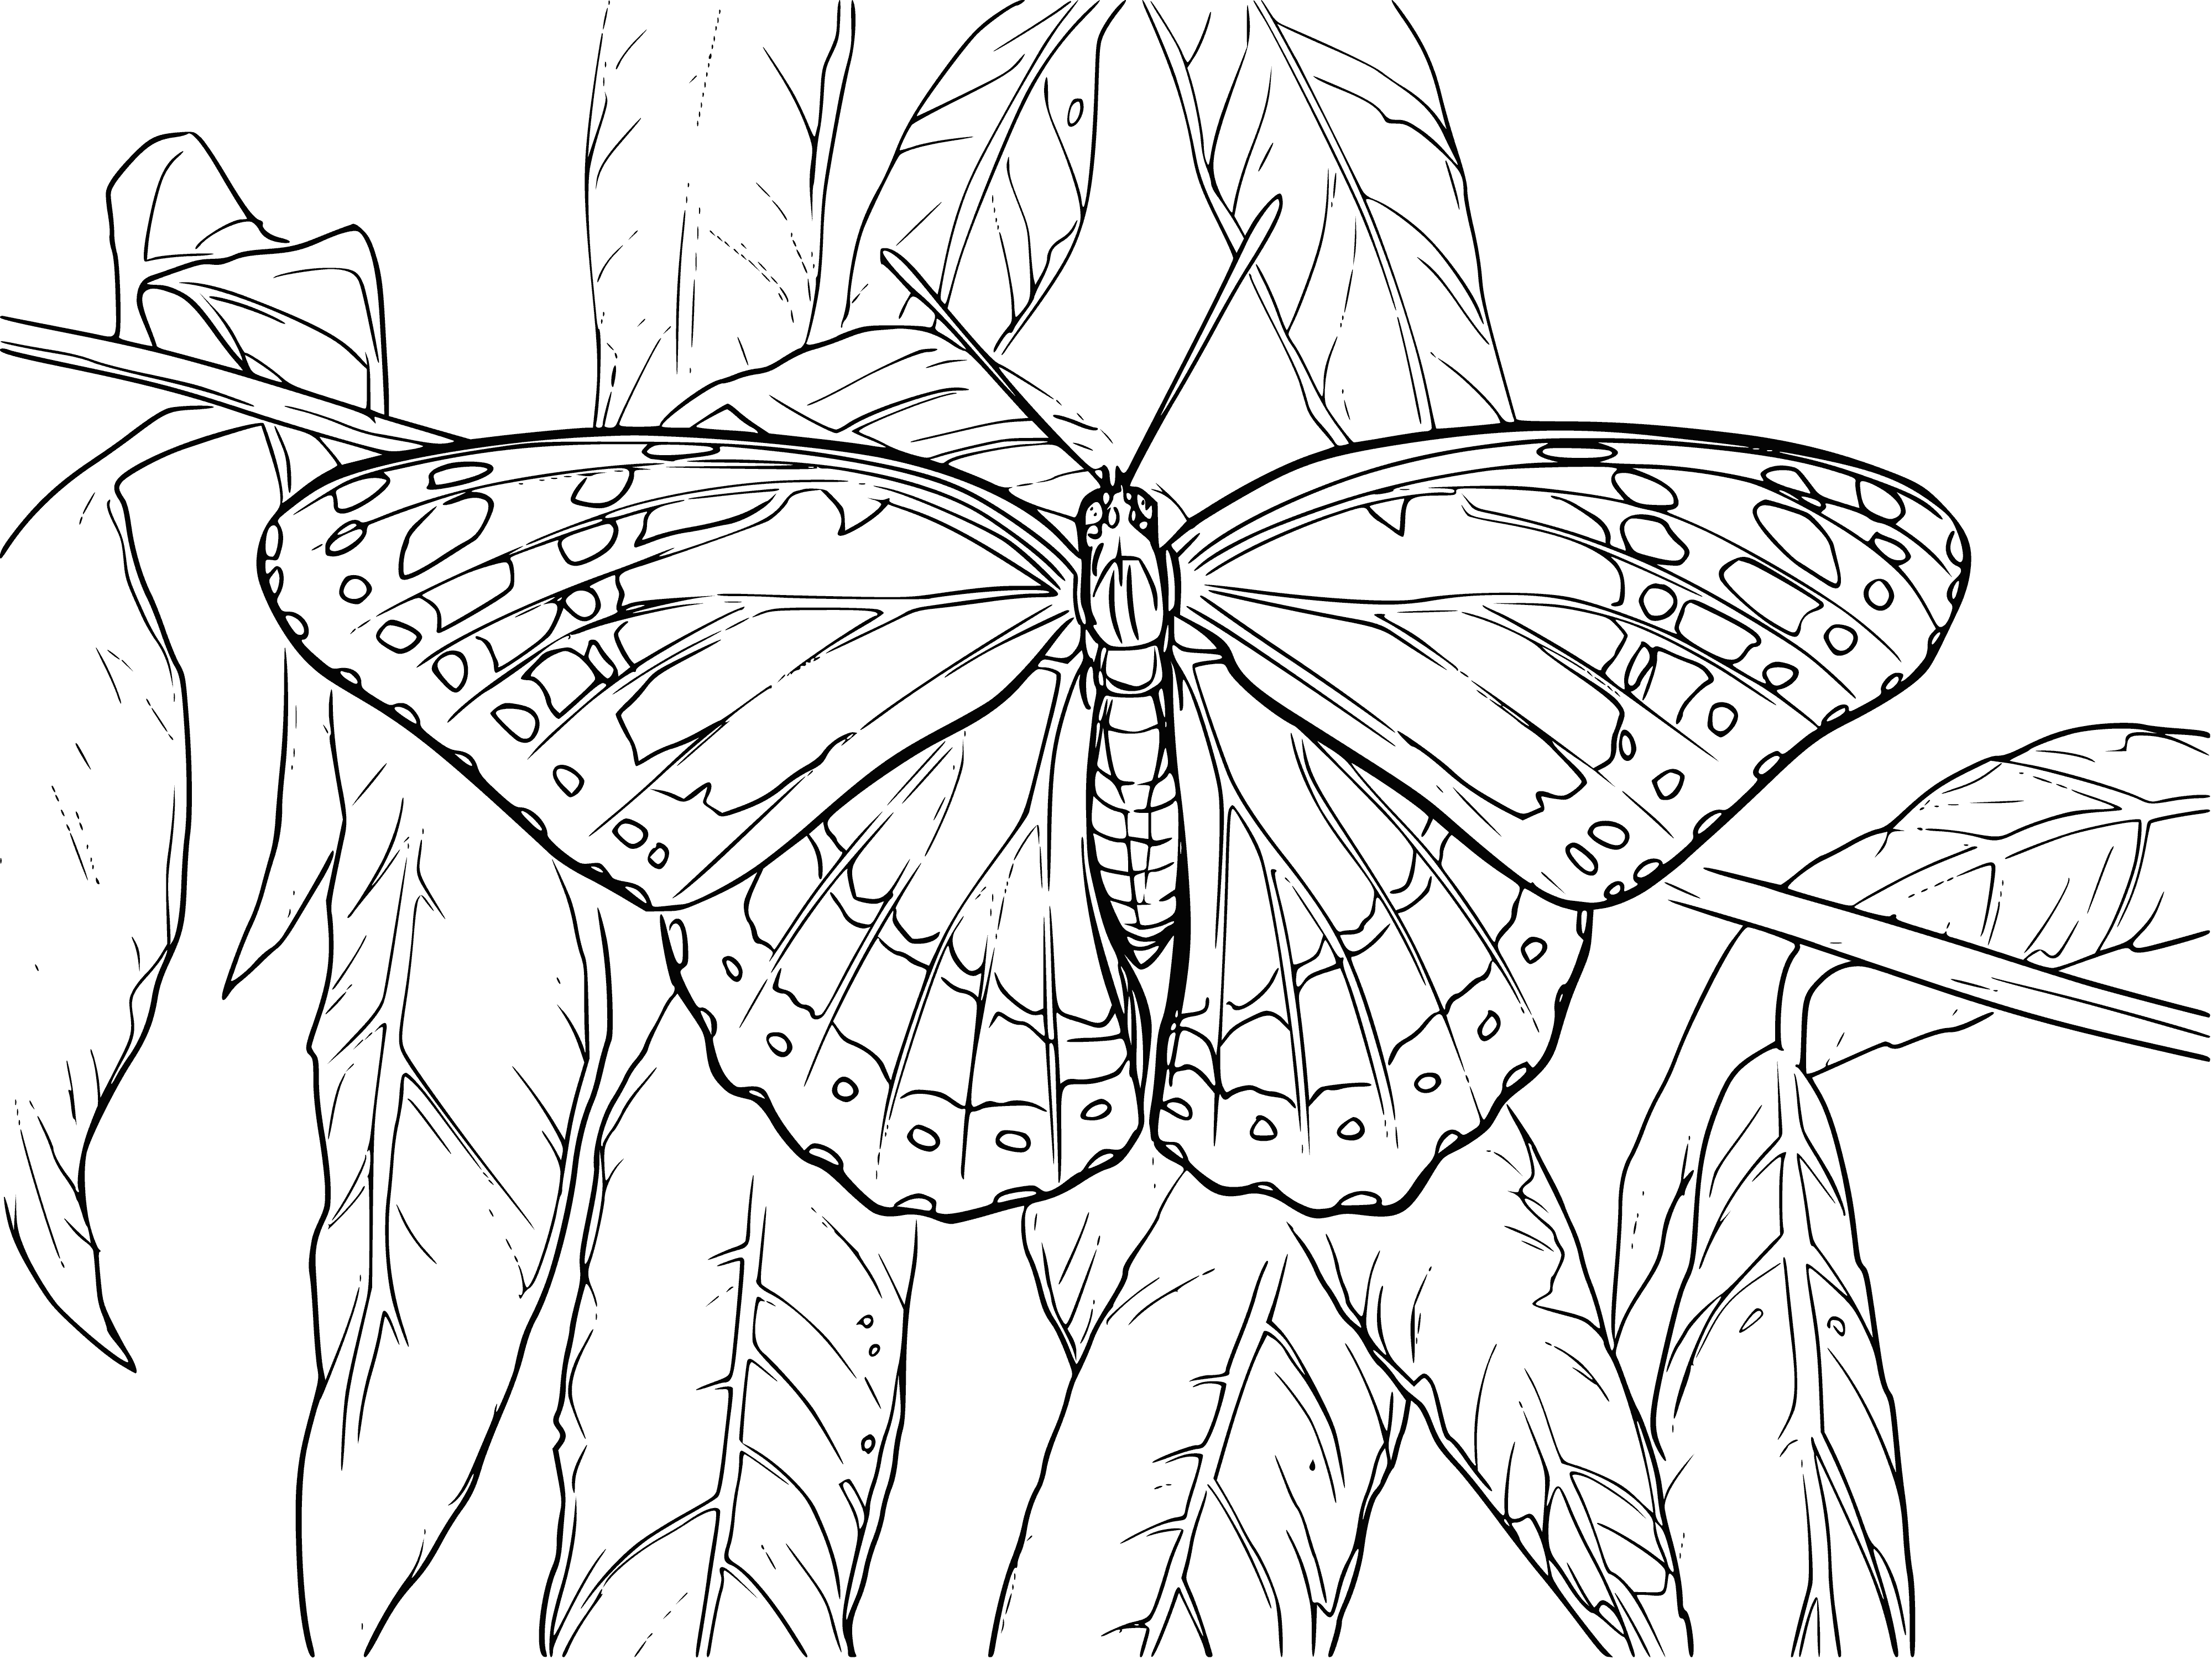 coloring page: Butterfly resting on branch with open wings, black/white markings, long, thin antenna, and short, delicate legs.